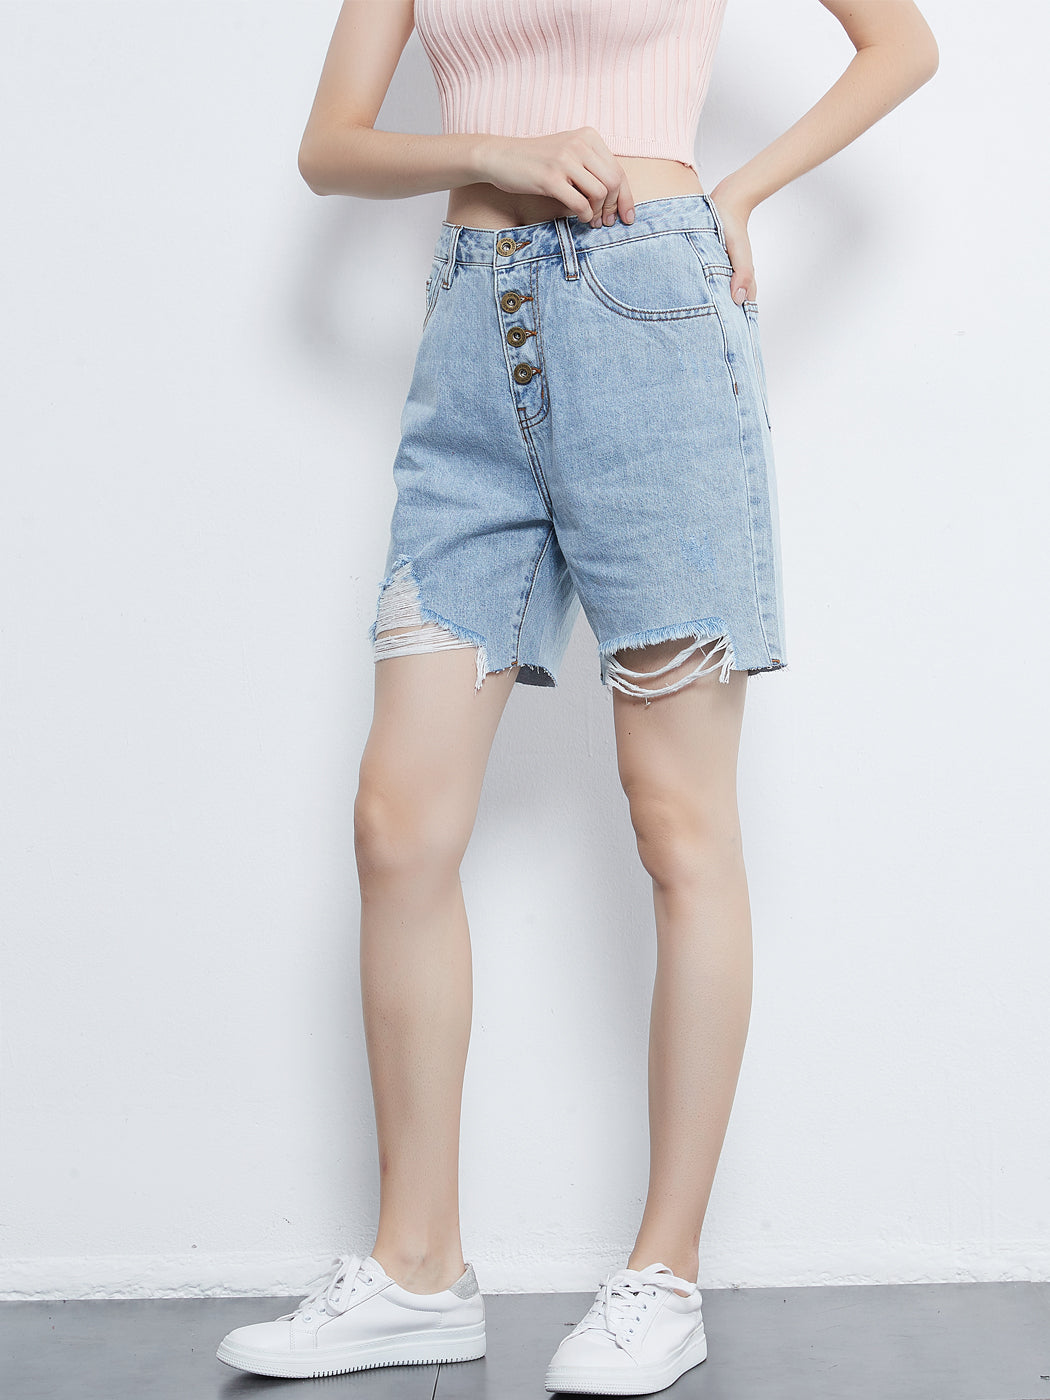 Ripped Denim Jean Shorts with Pockets